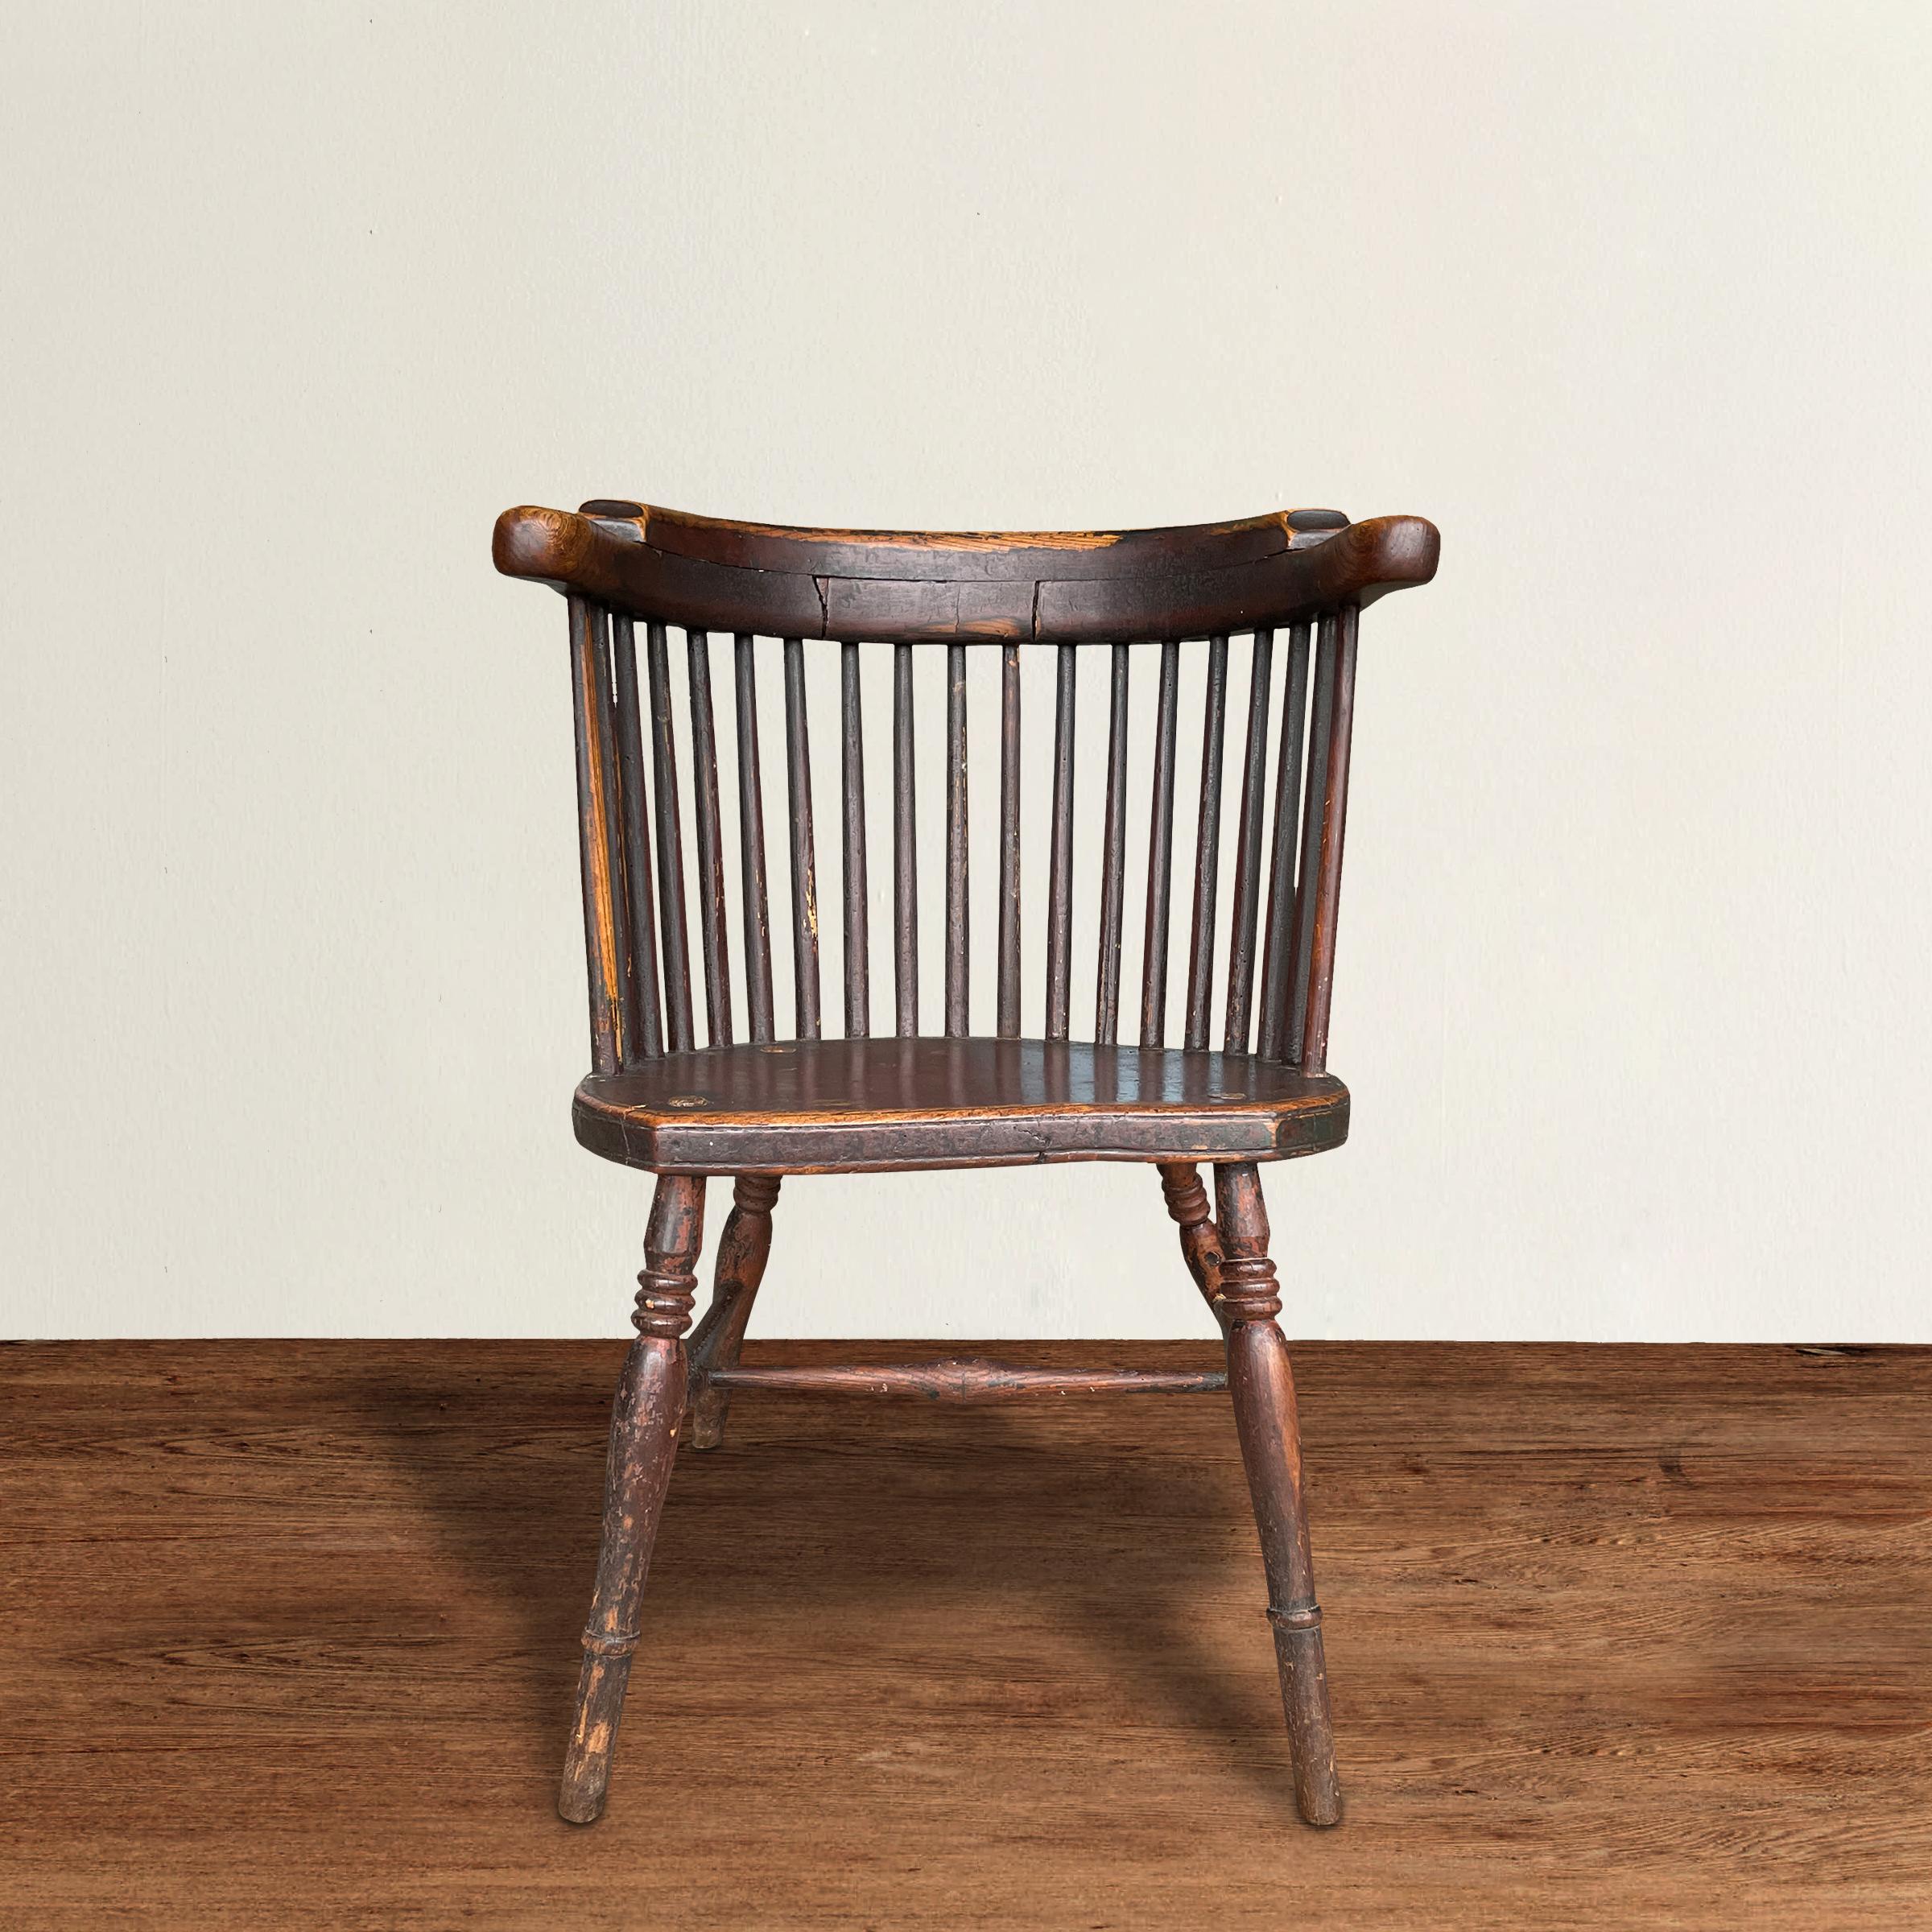 A lovable 19th century English barrelback Windsor arm chair with a graceful rounded crest-rail supported by several spindles, a sturdy saddle seat, splayed turned legs, and retaining its original sangre-de-boeuf painted finish.